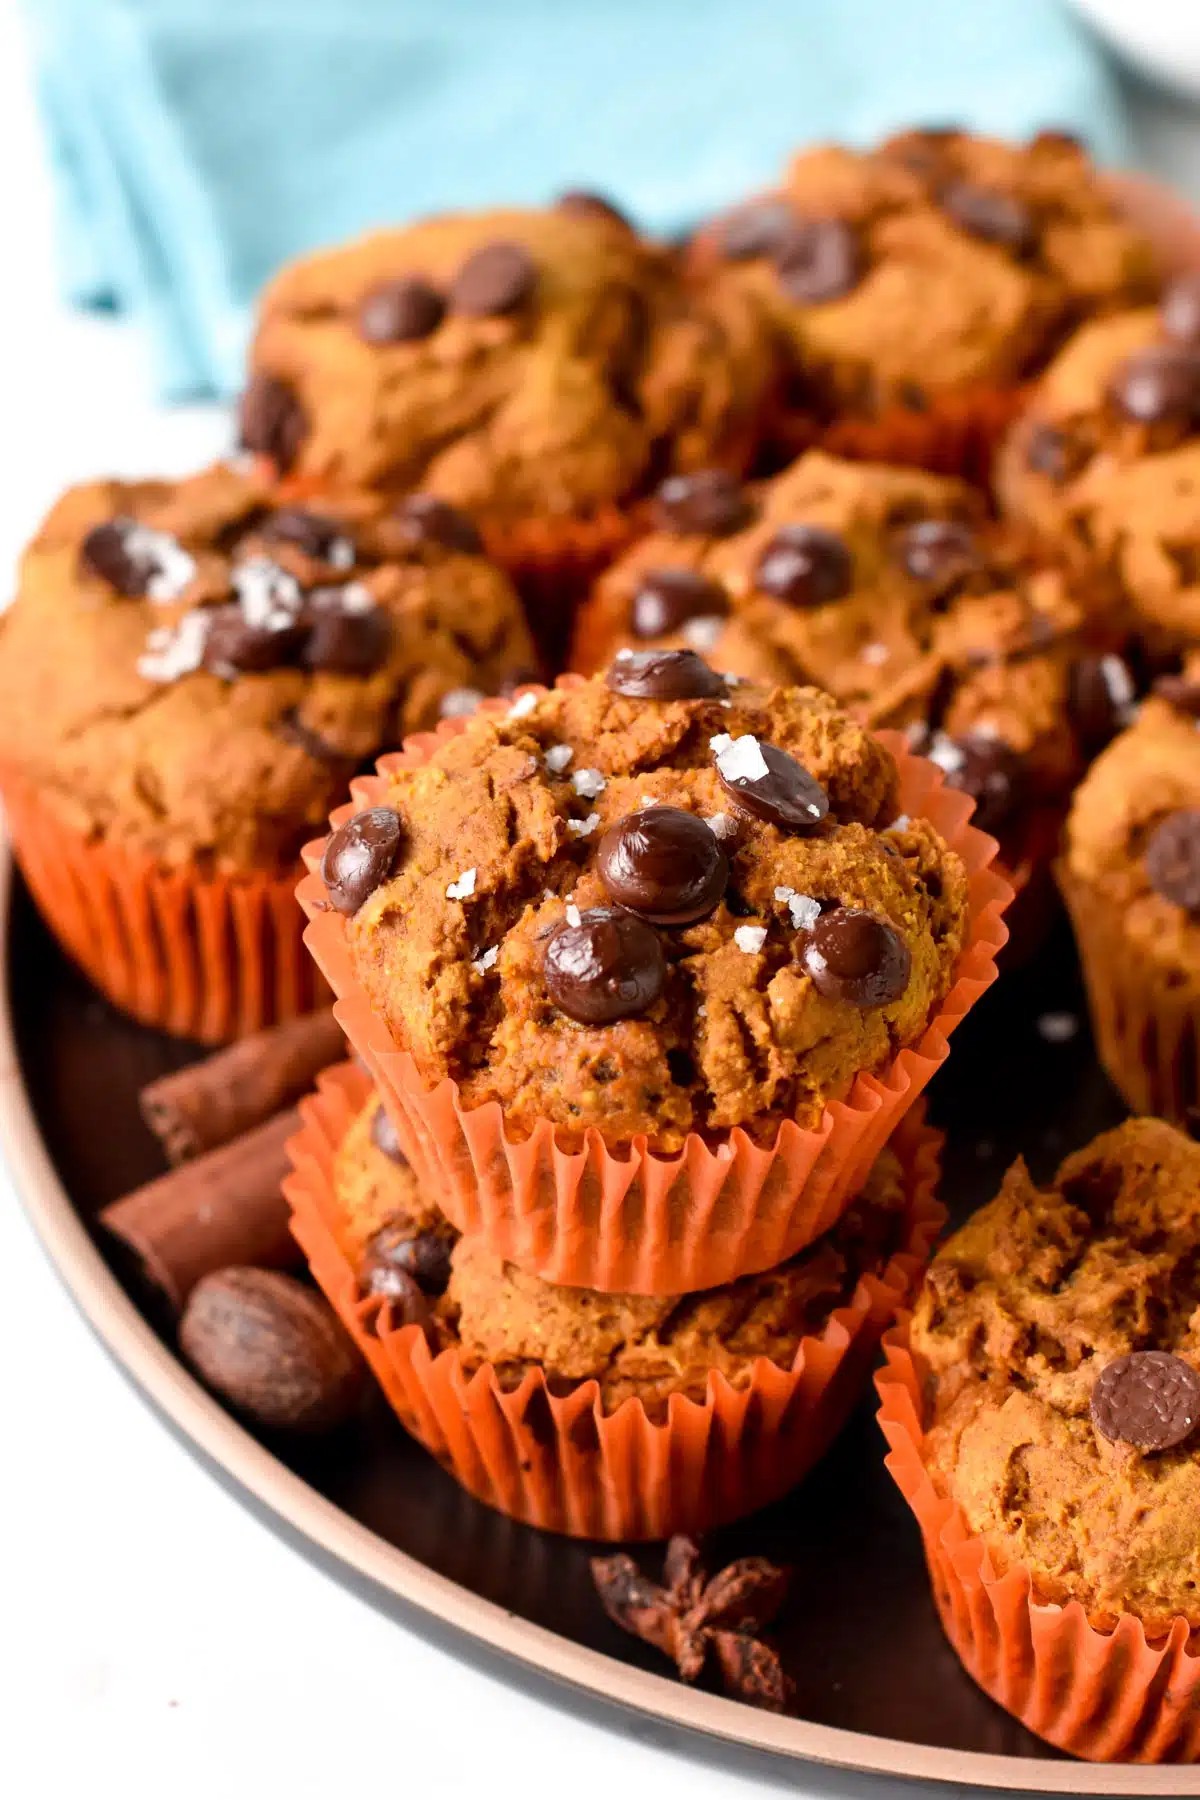 These 3 ingredient Pumpkin Muffins are easy moist pumpkin chocolate chips muffins made with 3 simple ingredients. Plus, they are allergy friendly, made without eggs butter, or dairy.These 3 ingredient Pumpkin Muffins are easy moist pumpkin chocolate chips muffins made with 3 simple ingredients. Plus, they are allergy friendly, made without eggs butter, or dairy.